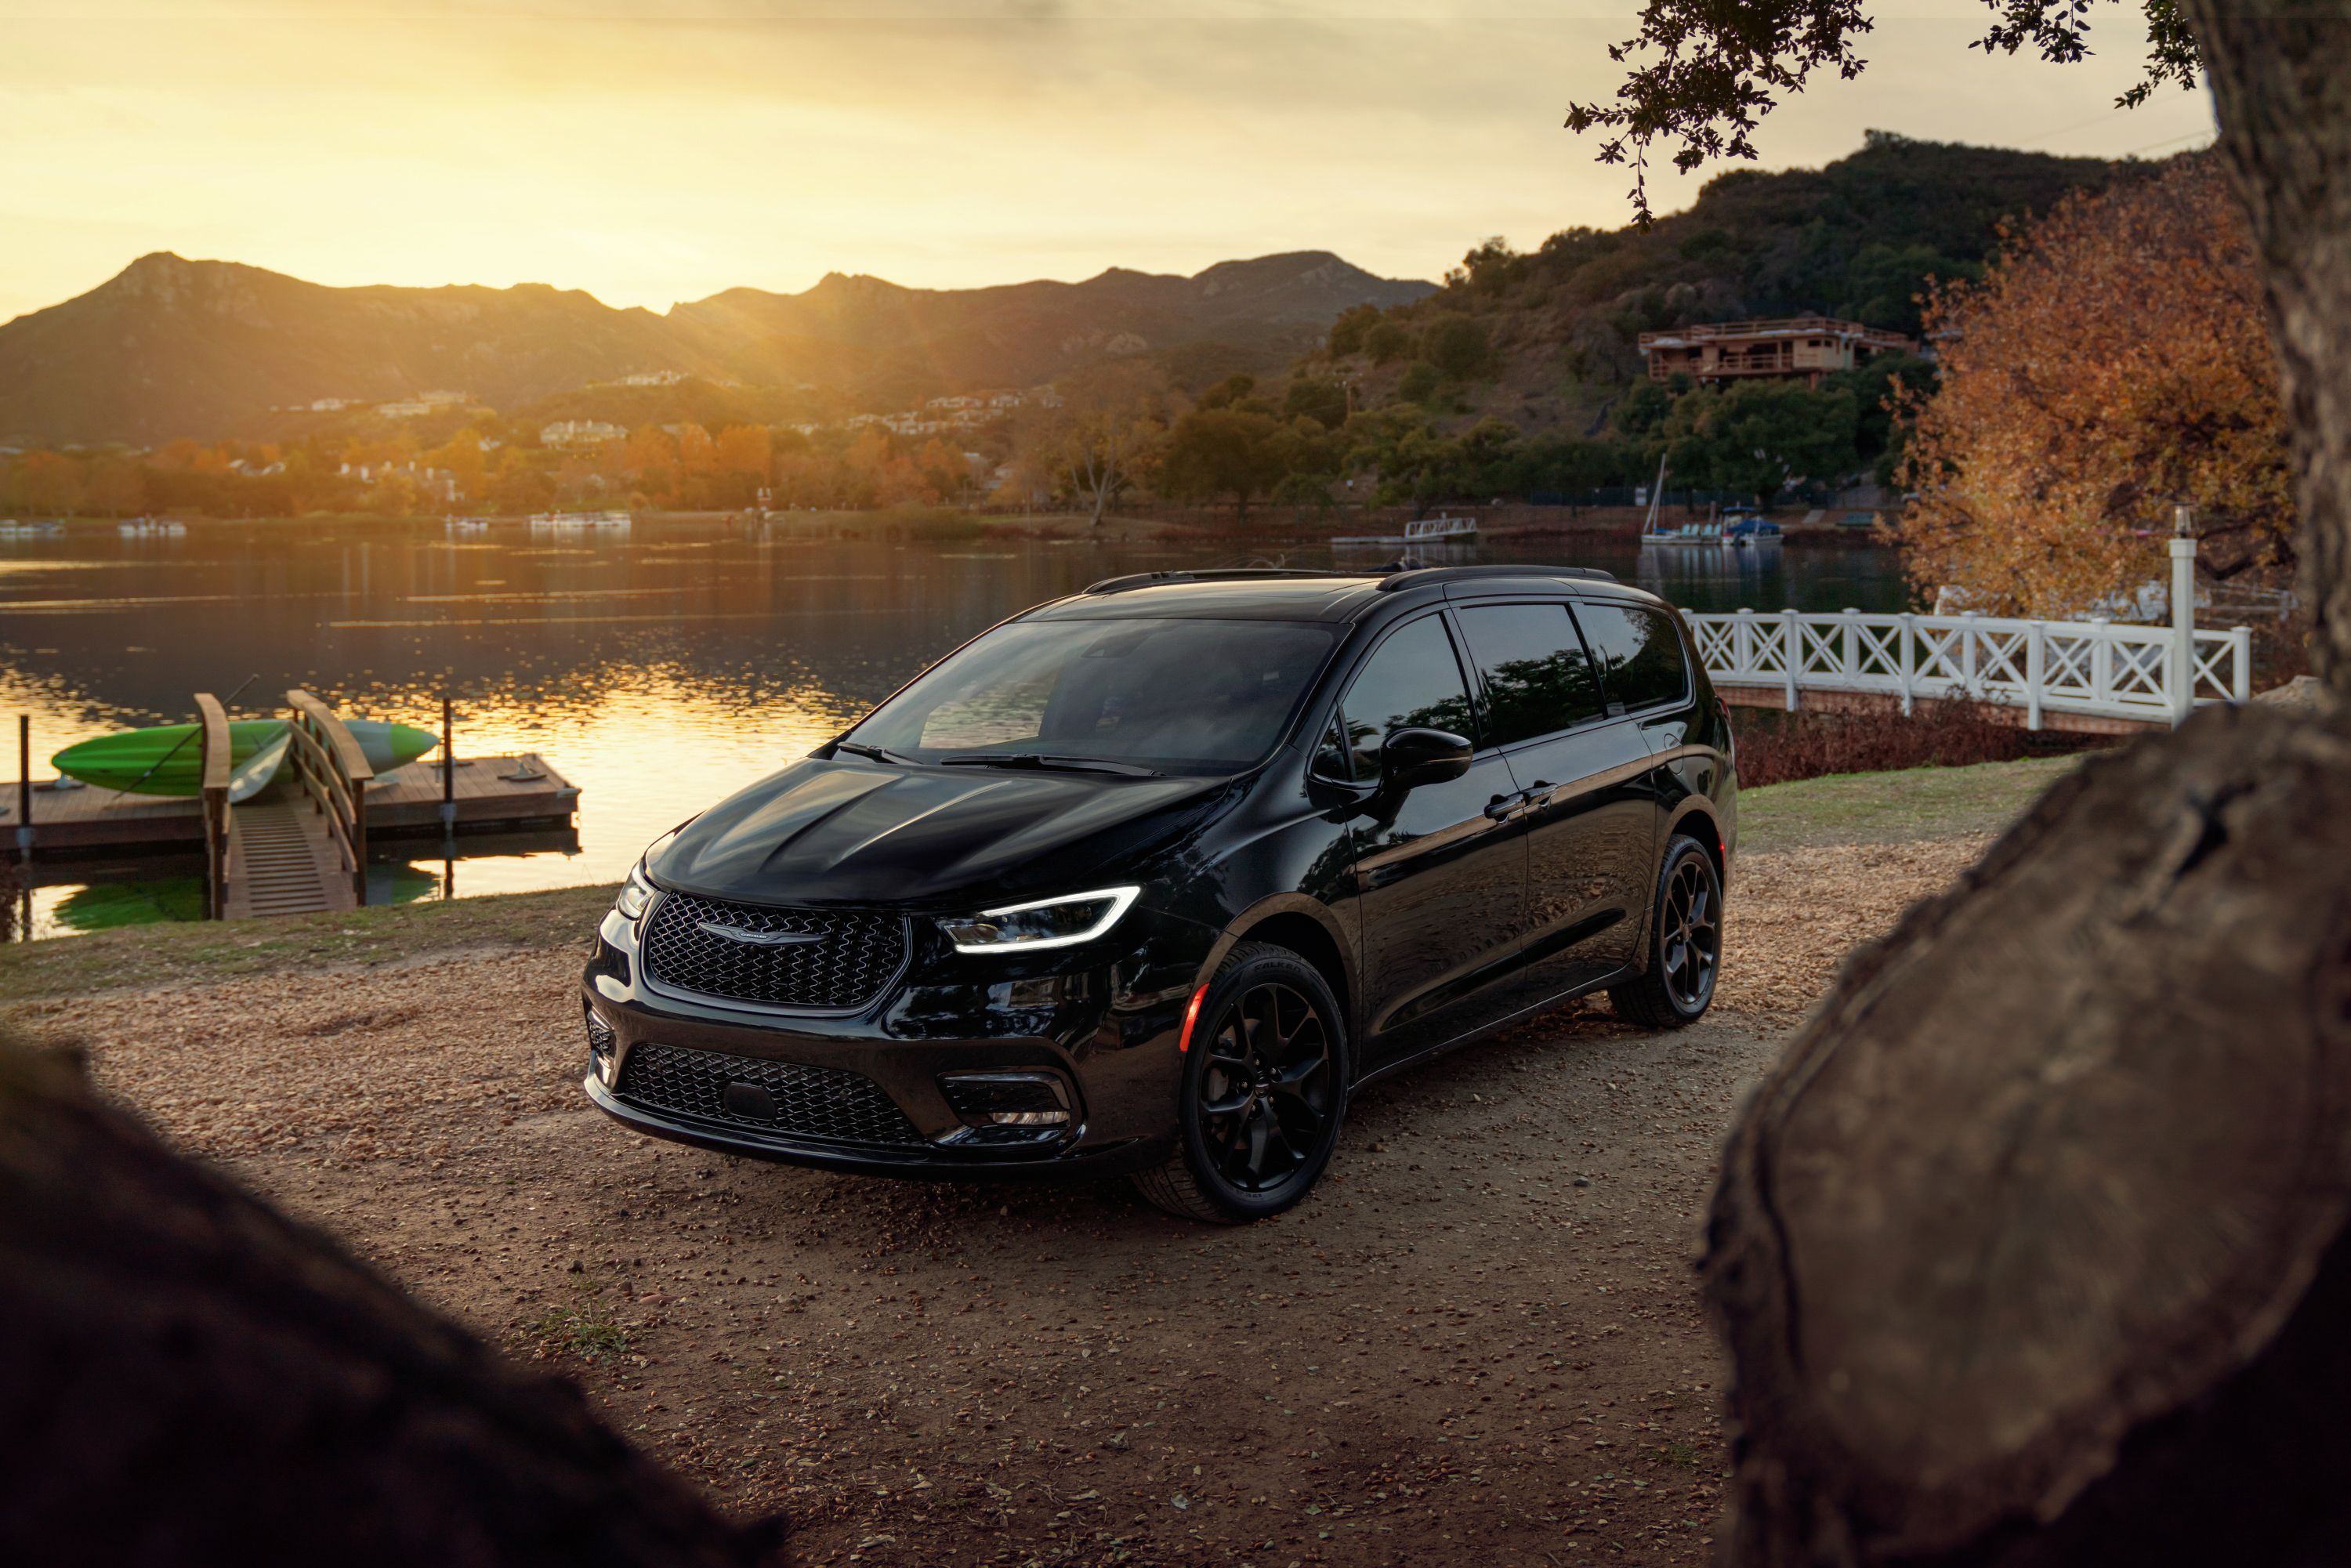 2021 Chrysler Pacifica Review, Pricing, and Specs